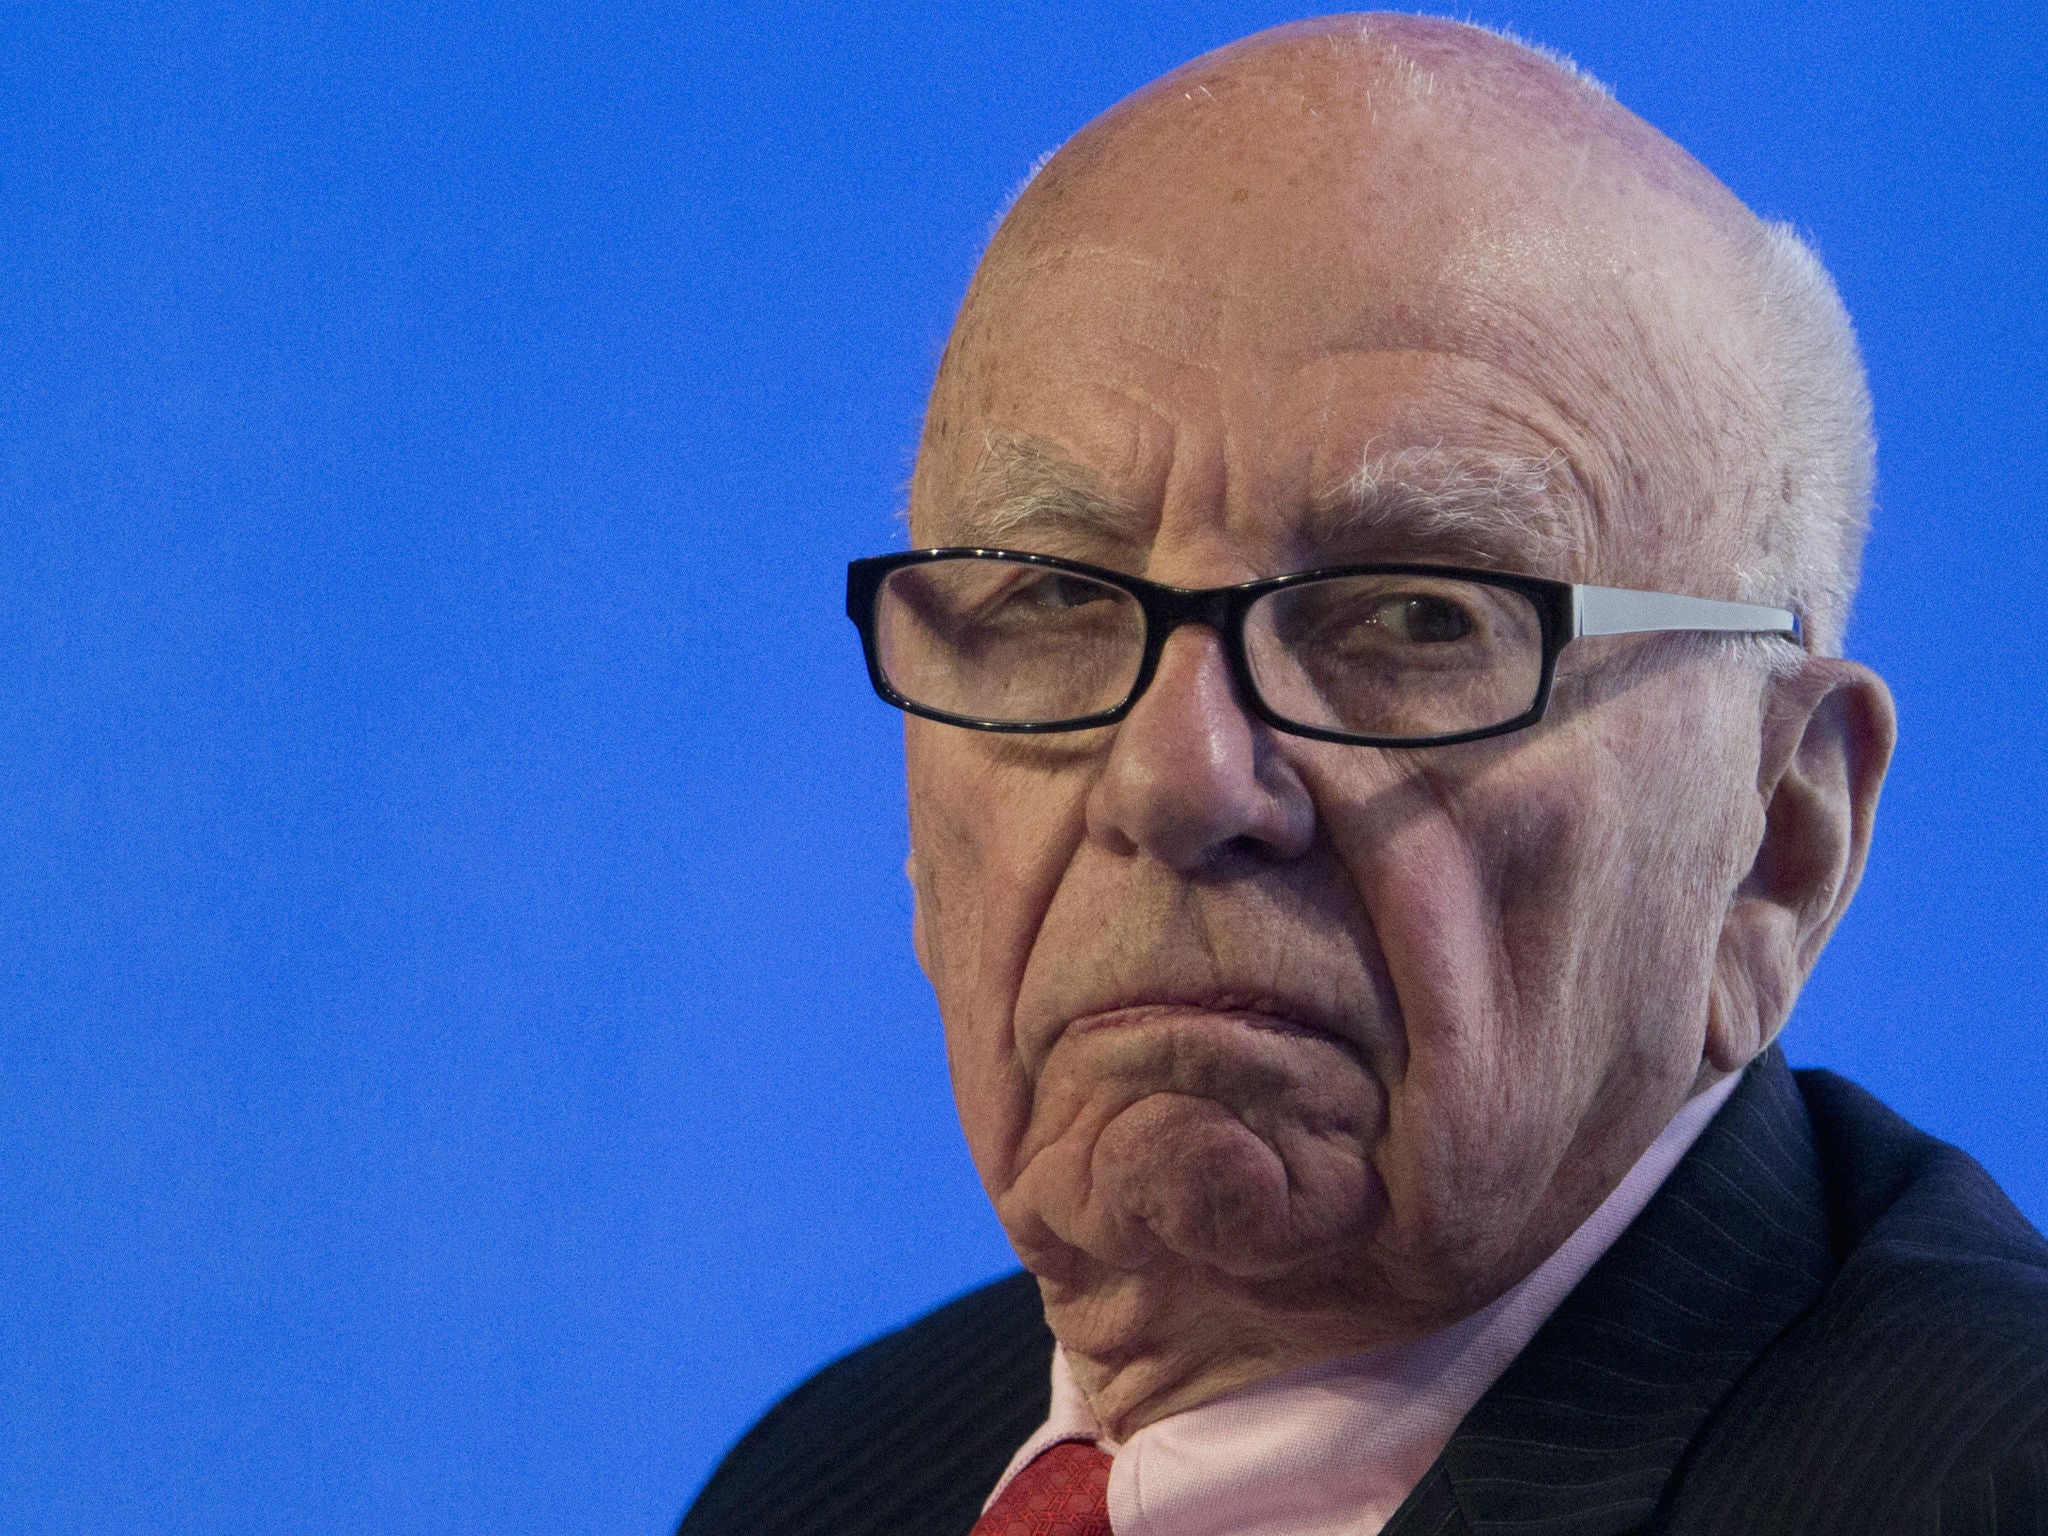 Rupert Murdoch's move for Sky News blocked over 'media plurality concerns'